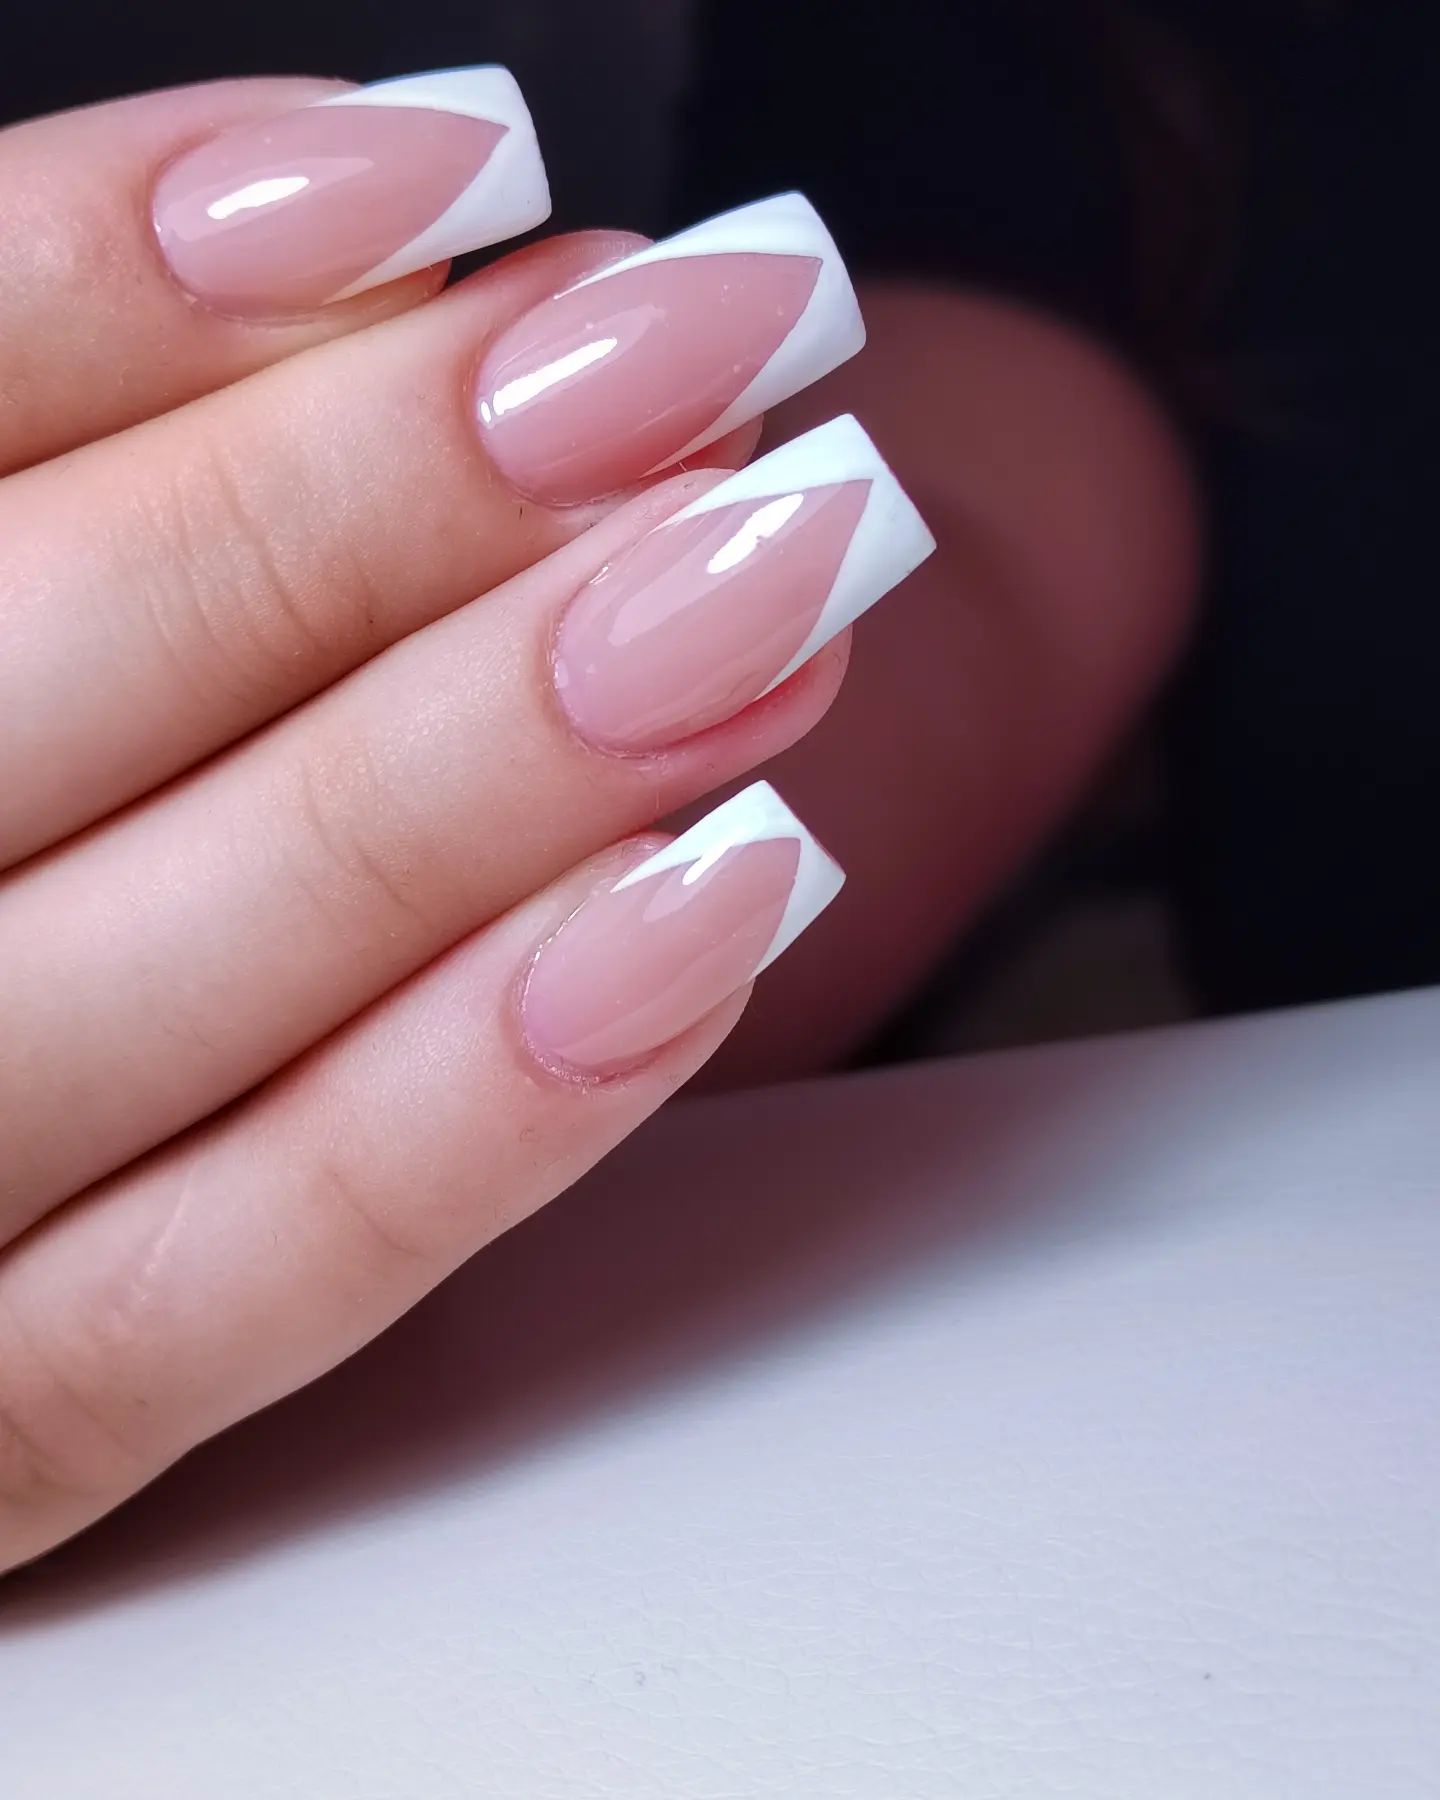 This type and specific shape of a French manicure will look amazing for those who like to switch it up from time to time.